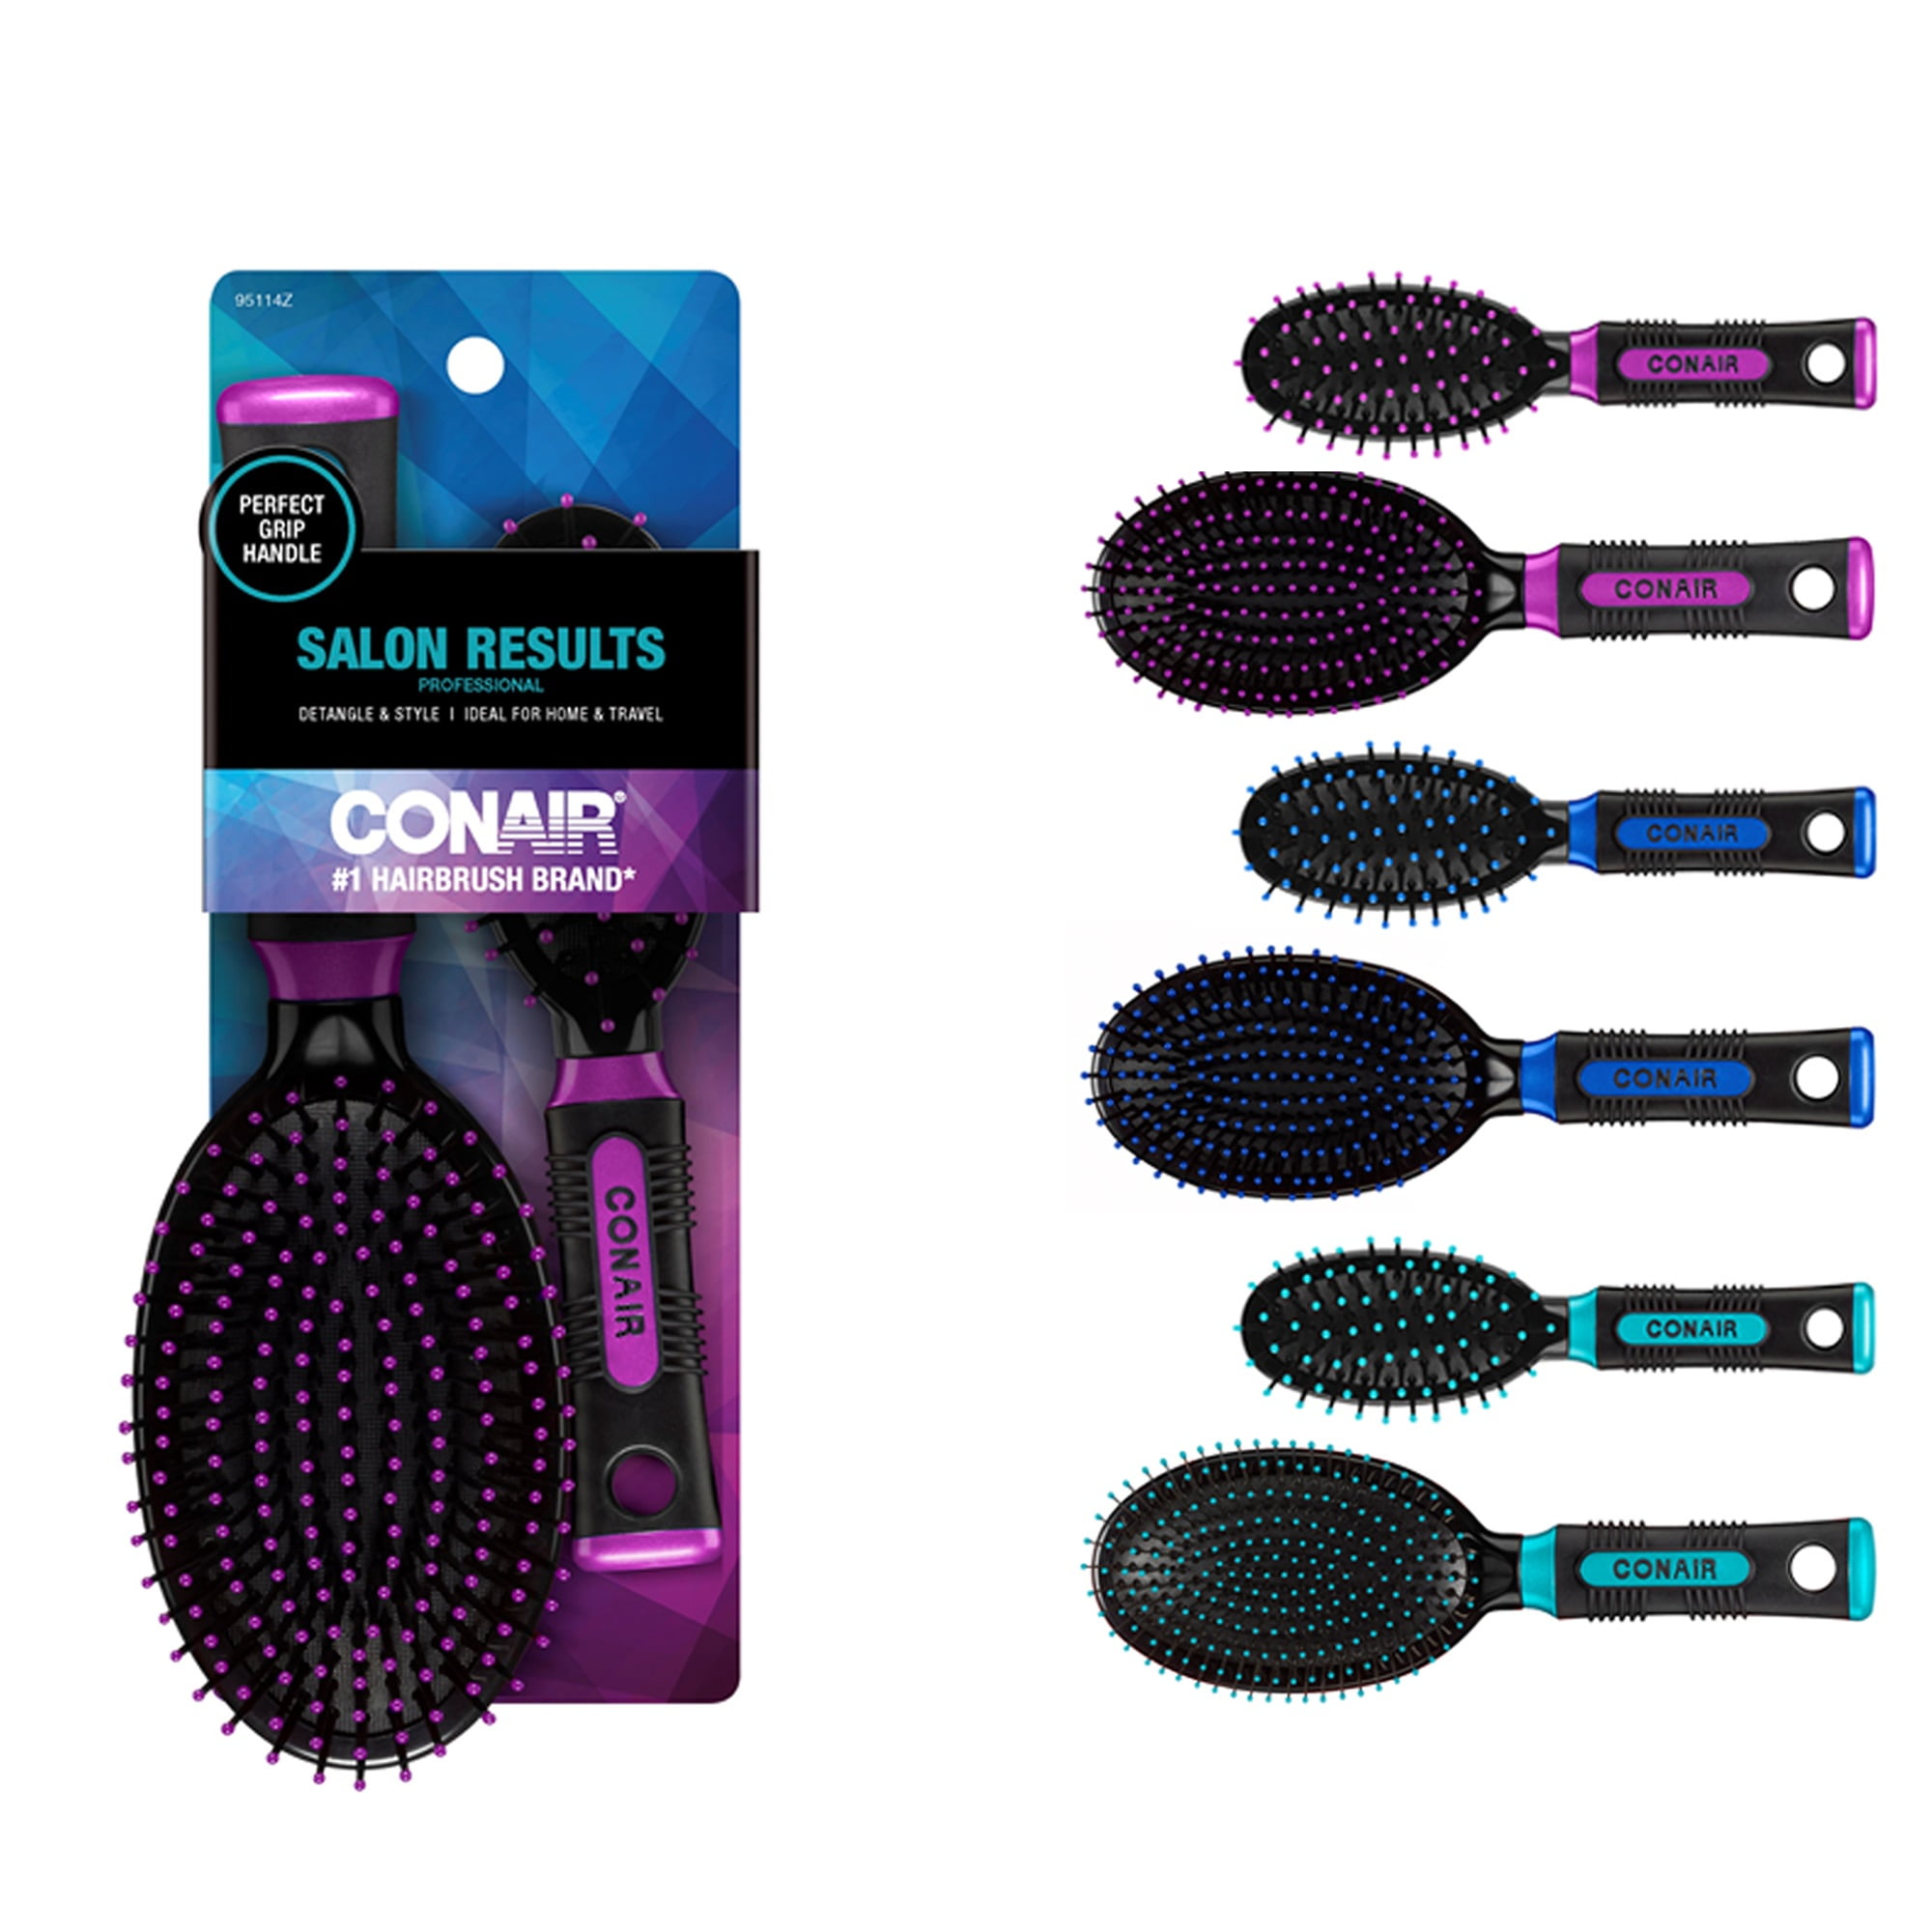 Conair Professional Nylon Bristle Cushion Hairbrush 2-Piece Set with Rubber-Grip Handles, Colors Vary, 2ct (1 Compact for Travel and 1 Full-Sized)